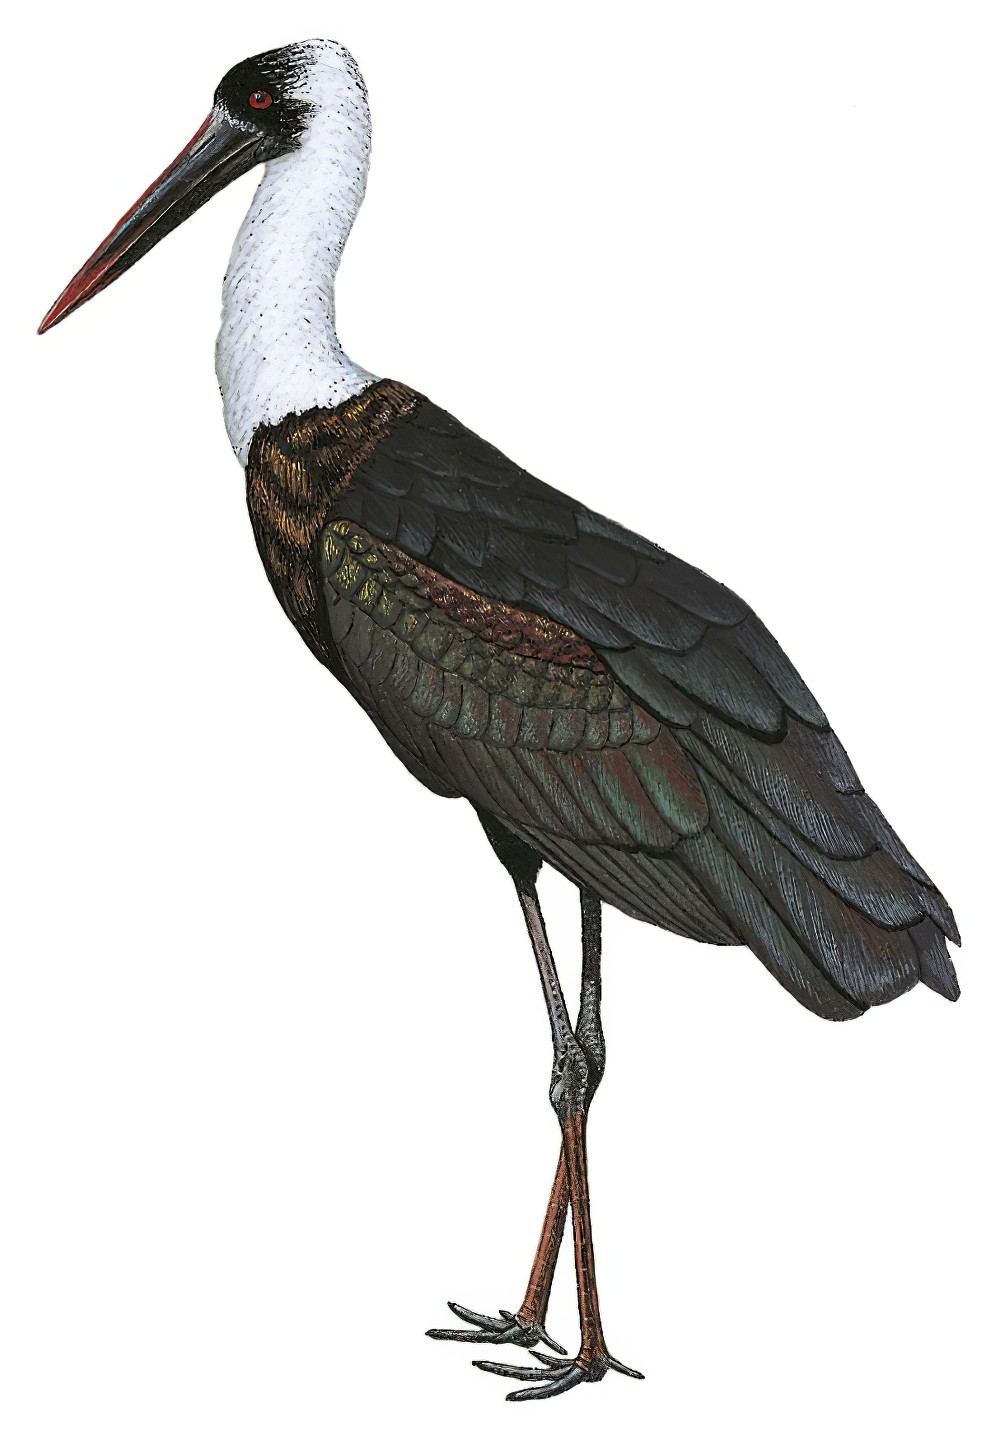 Woolly-necked Stork / Ciconia episcopus